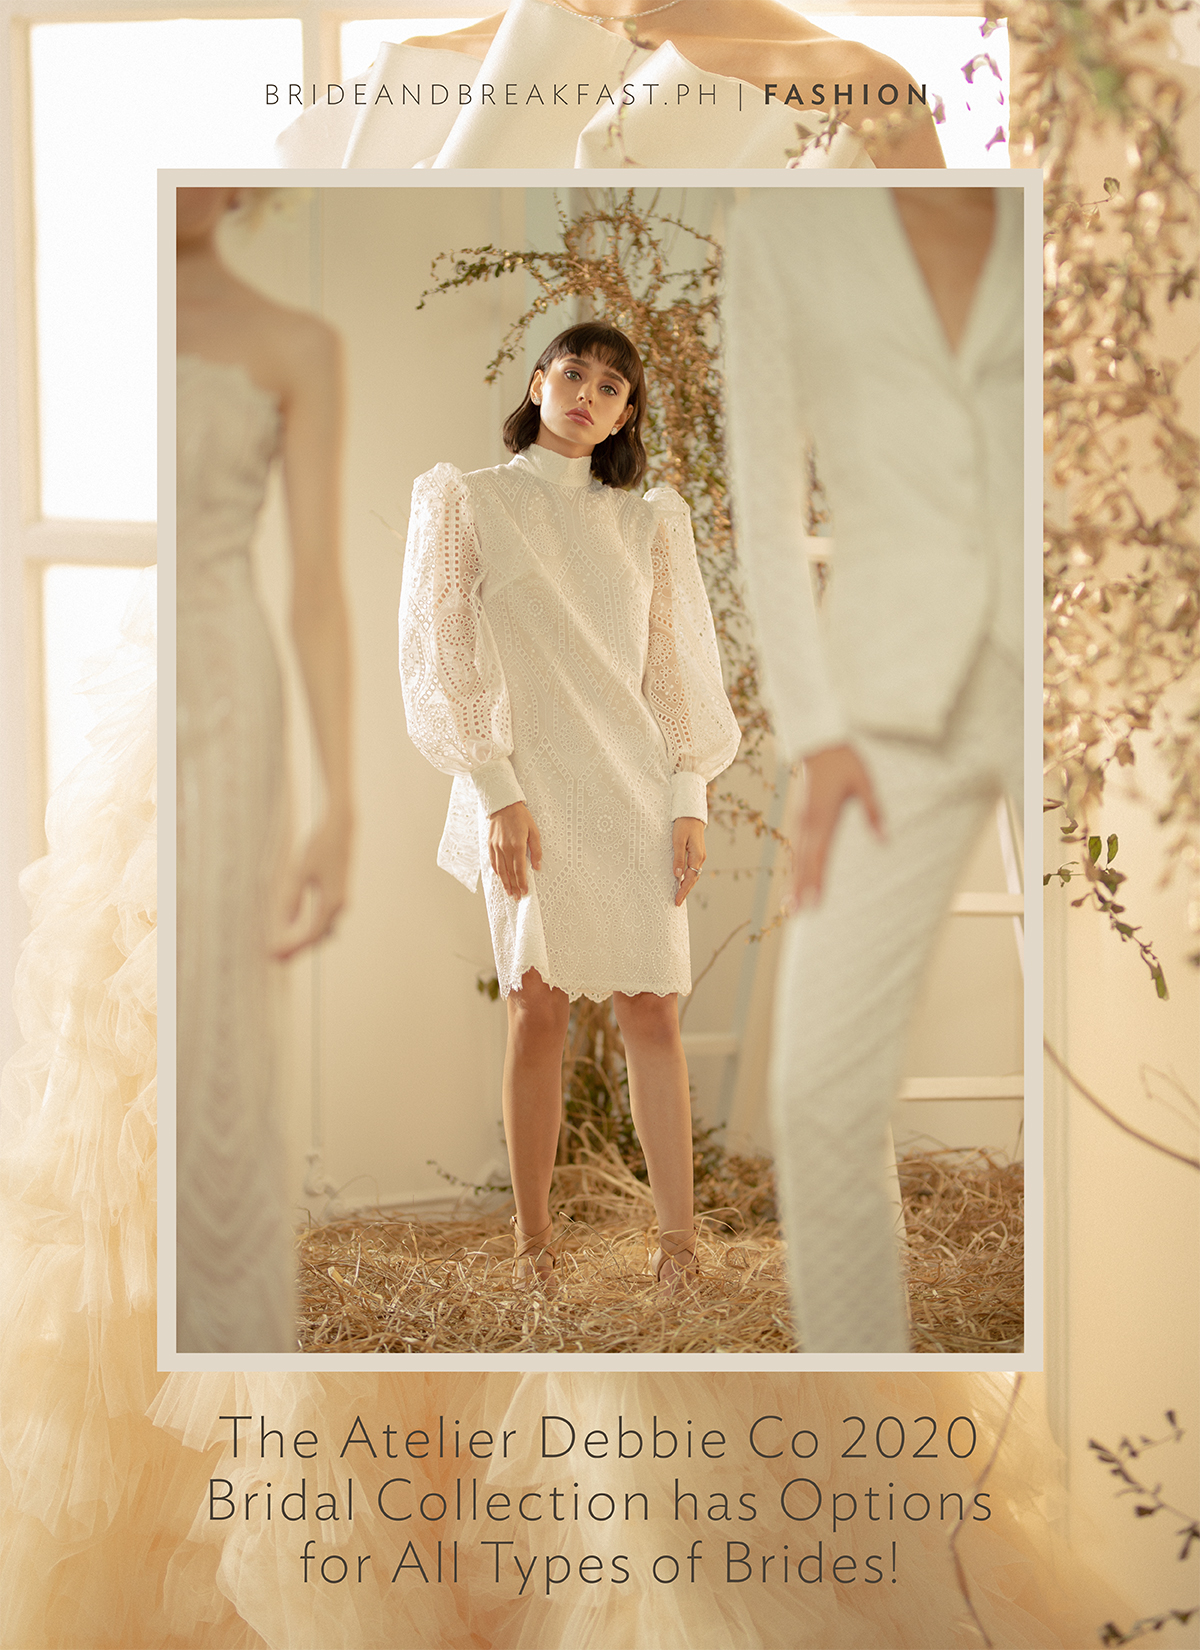 The Atelier Debbie Co 2020 Bridal Collection has Options for All Types of Brides!